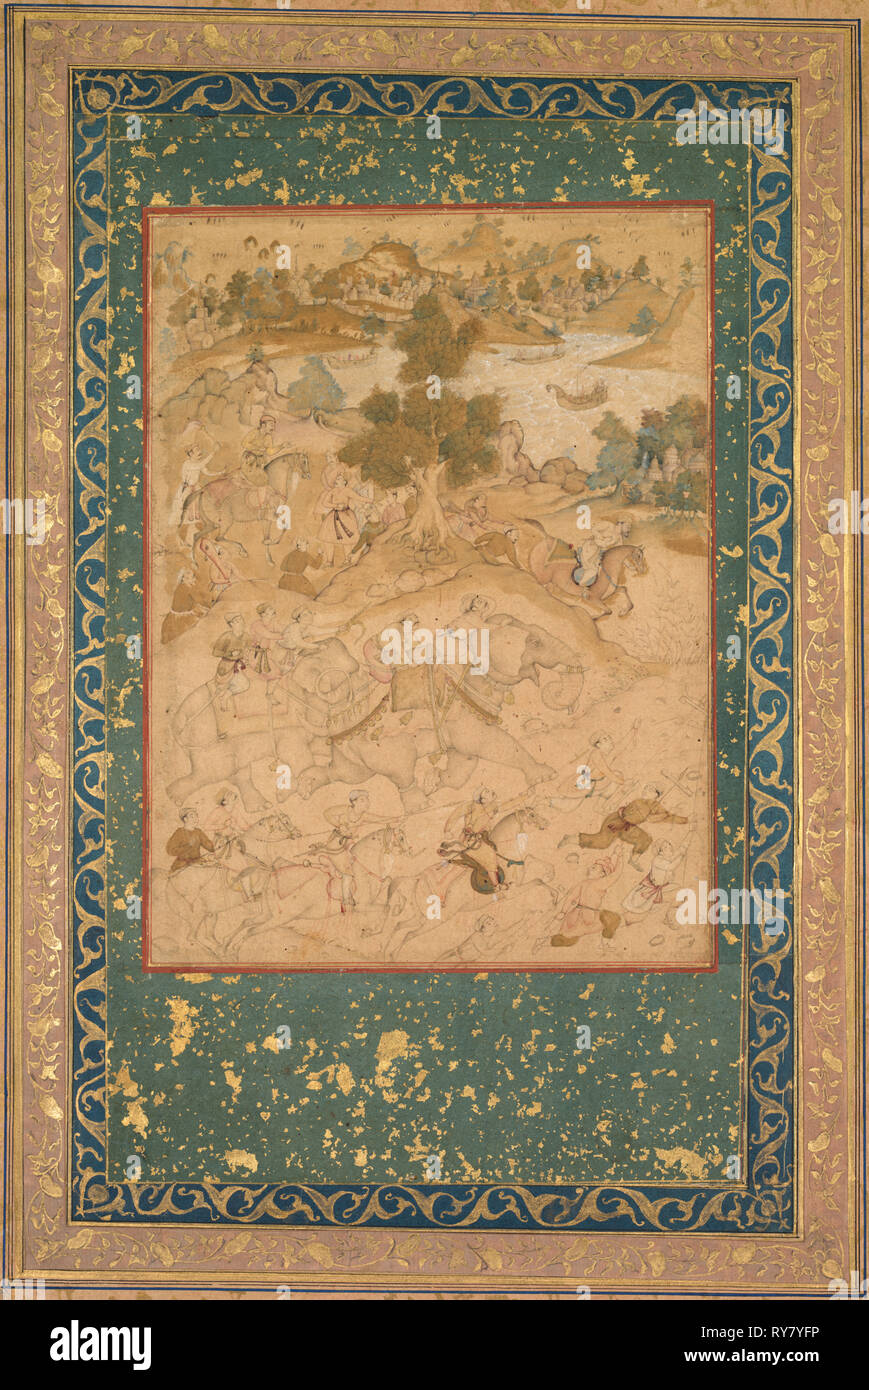 Akbar supervising the capture of wild elephants at Malwa in 1564, painting 90 from an Akbar-nama (Book of Akbar) of Abu’l Fazl (Indian 1551–1602), c. 1602–3; borders added c. 1700s. Attributed to Farukh Chela (Indian), or Govardhan (Indian, active c.1596-1645), or Dhanraj (Indian). Ink with use of colors and gold on paper, mounted on an album page with borders of gold-decorated buff and blue paper (verso); calligraphy by Faqir Ali (recto); page: 37.5 x 25.4 cm (14 3/4 x 10 in Stock Photo